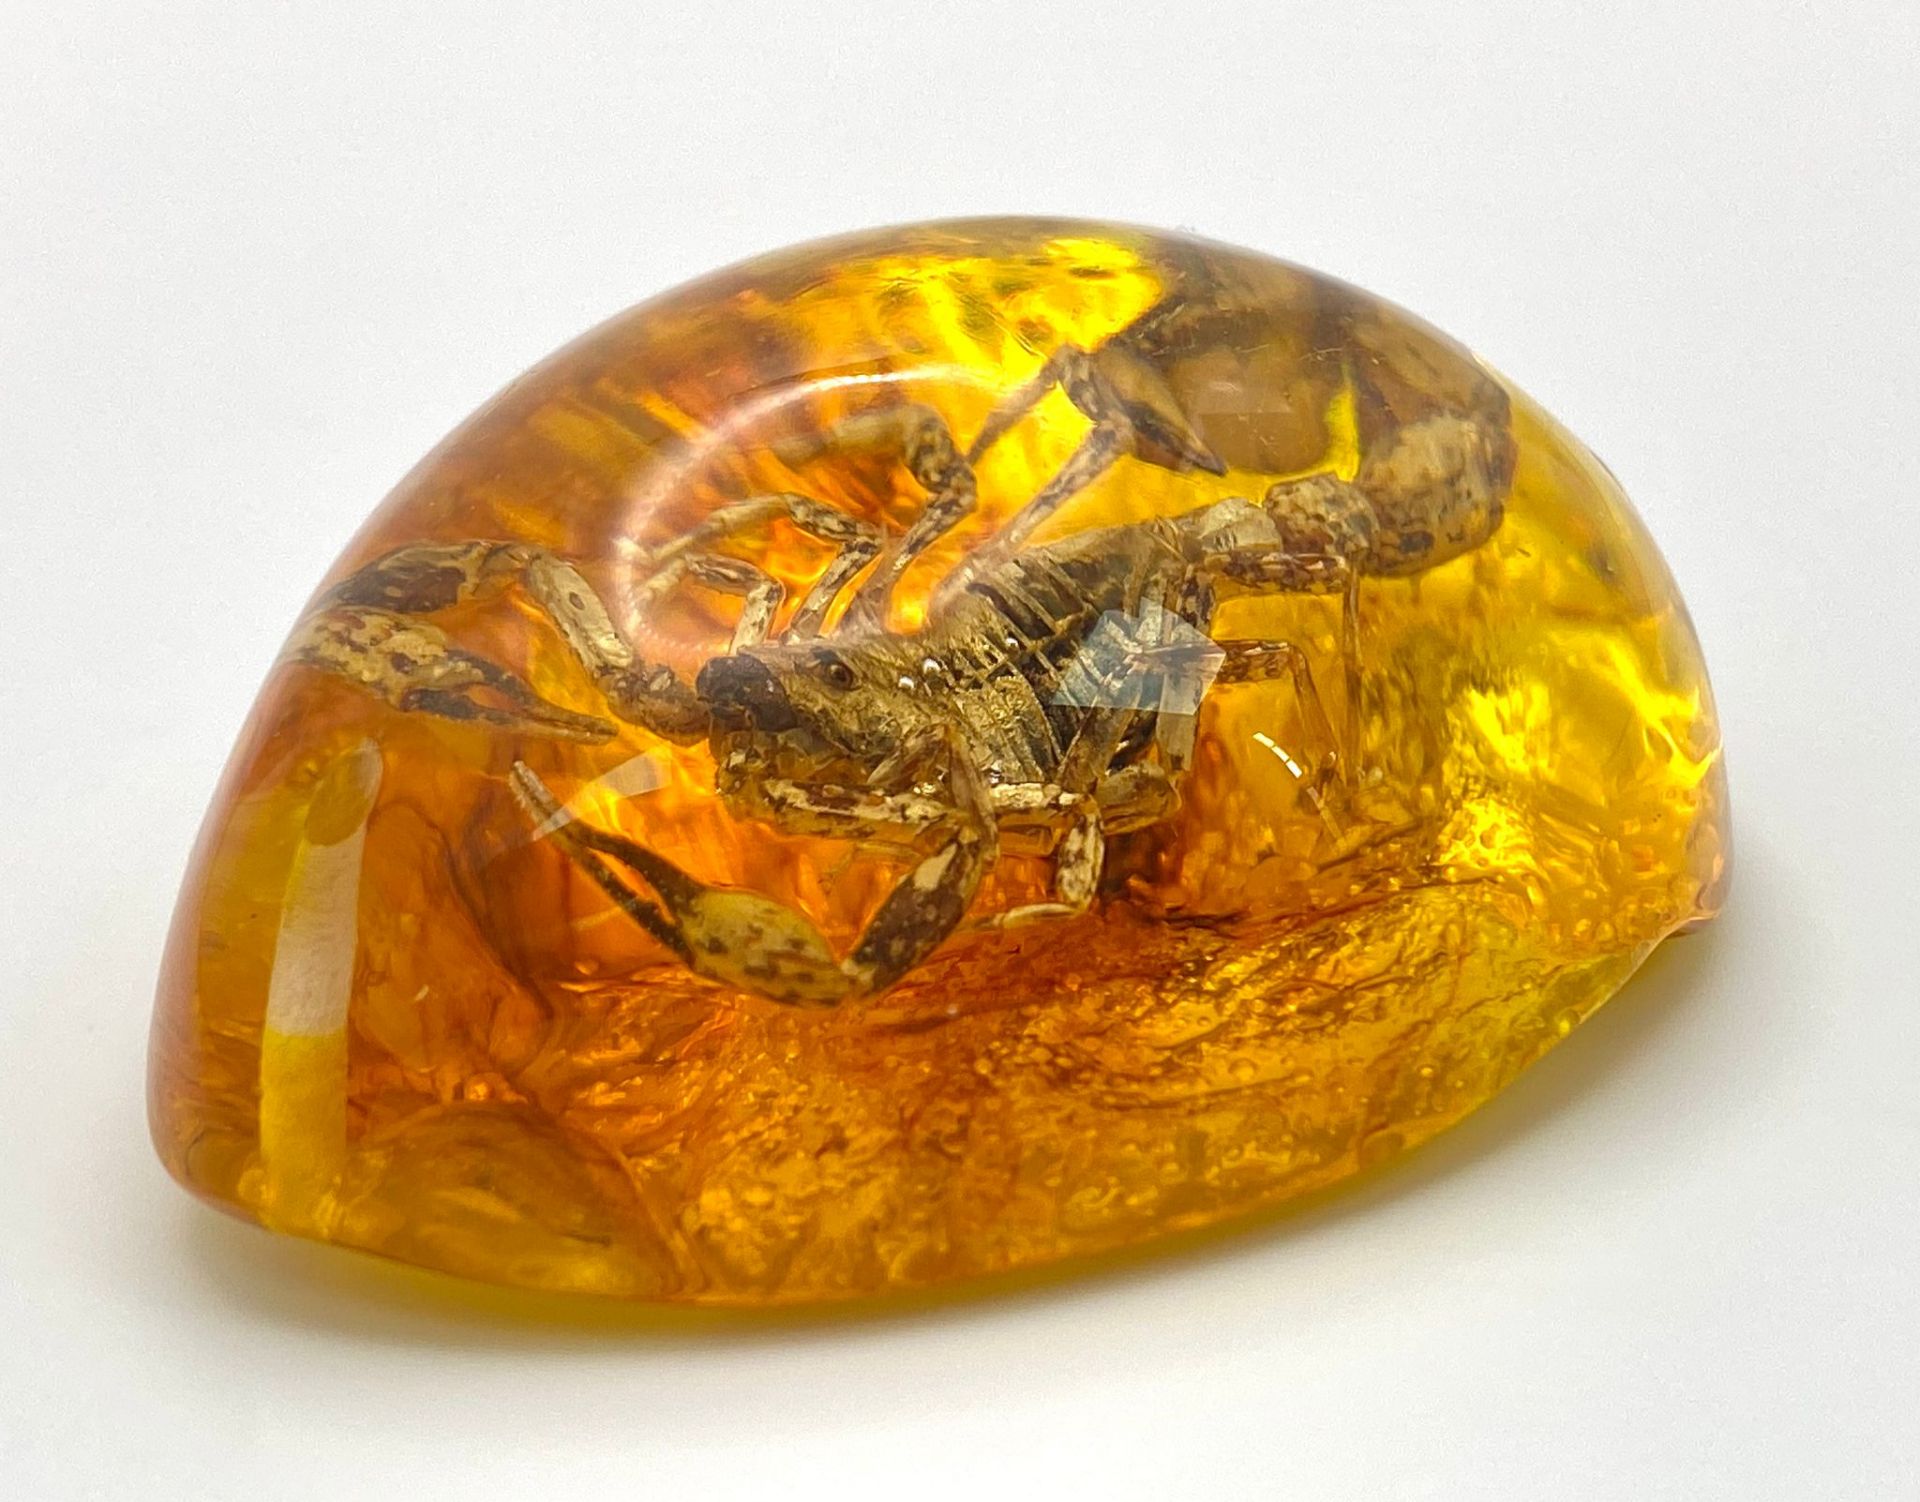 A Terrifying Scorpion Trapped in Amber Resin -Pendant/Paperweight. 6cm